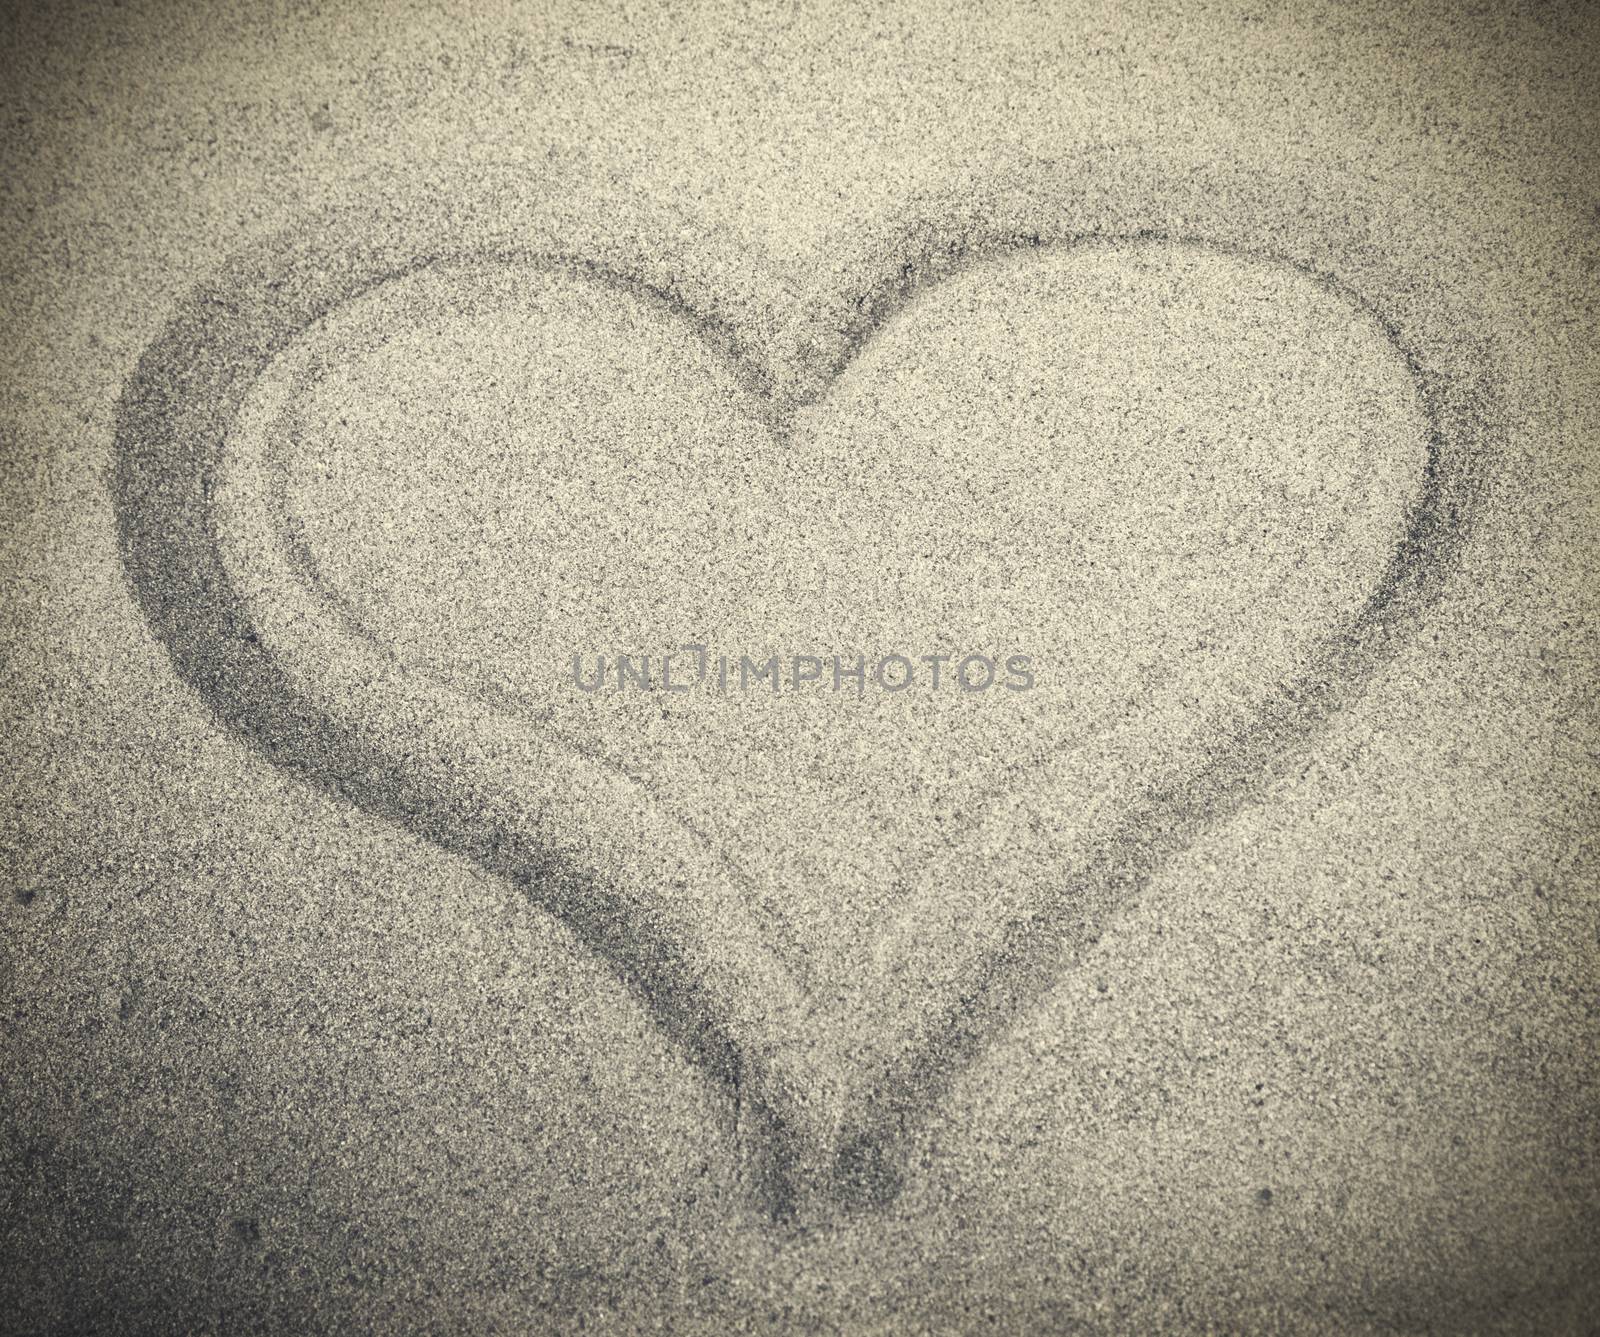 Picture of heart drew on white sand by anelina